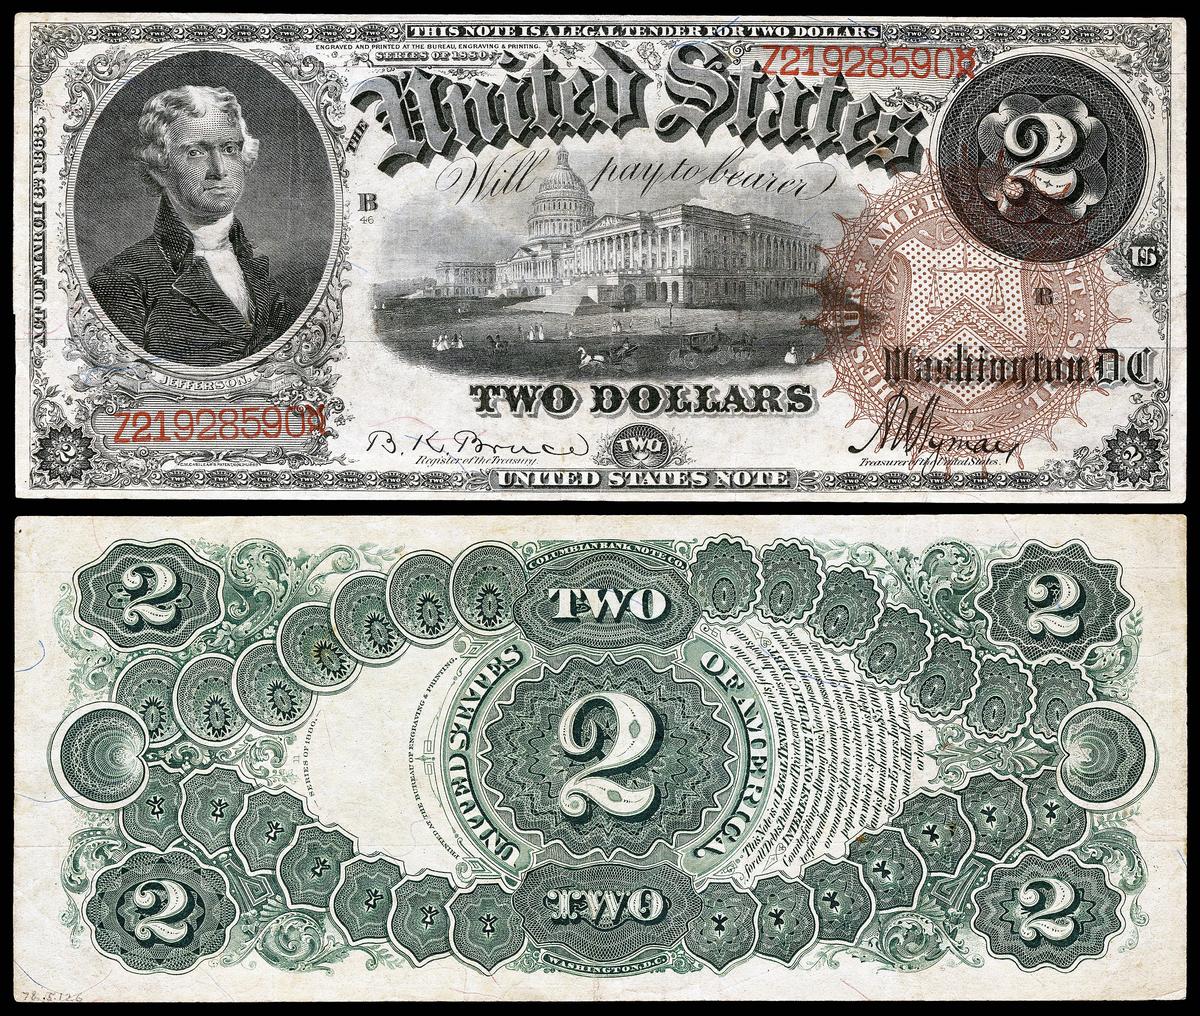 An 1880 $2 bill.  (<a href="https://en.wikipedia.org/wiki/File:US-$2-LT-1880-Fr-52.jpg">National Numismatic Collection, National Museum of American History</a>/CC BY-SA 4.0)